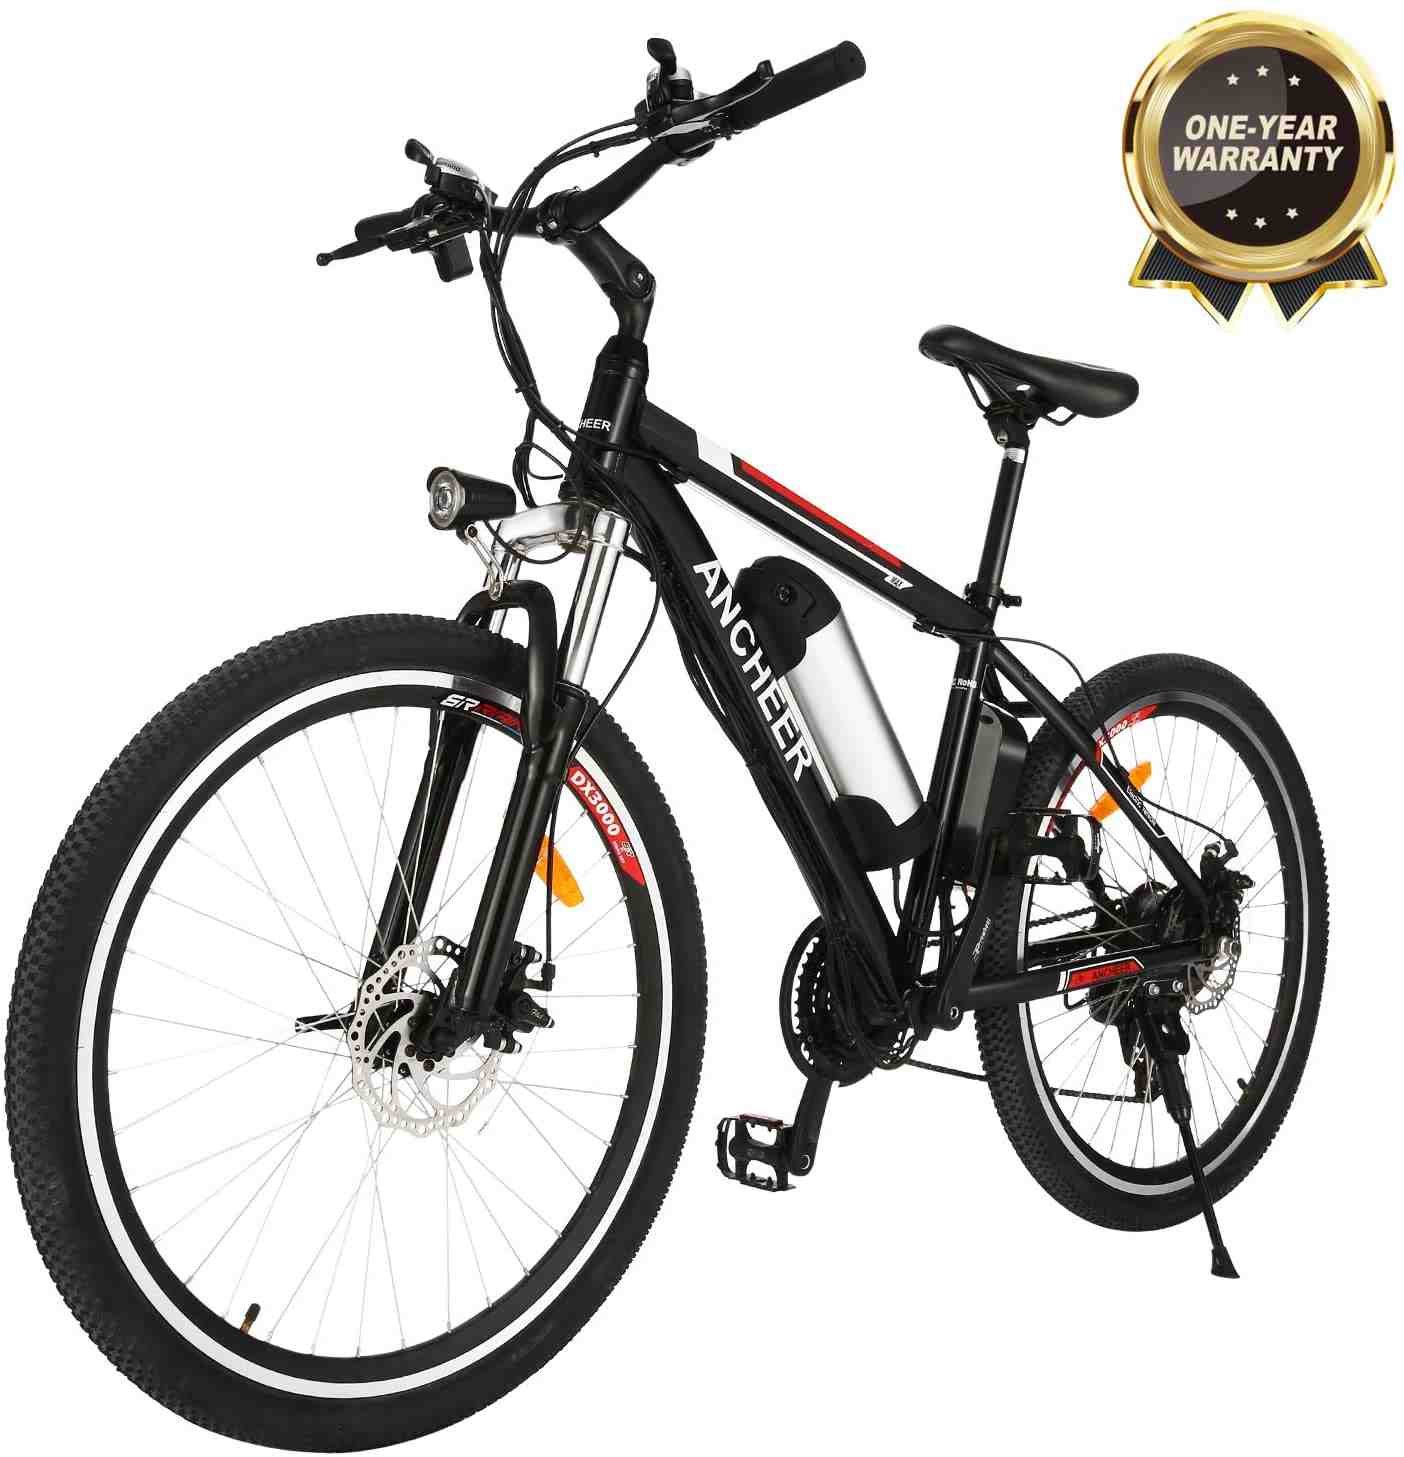 Is Ancheer a good electric bike?